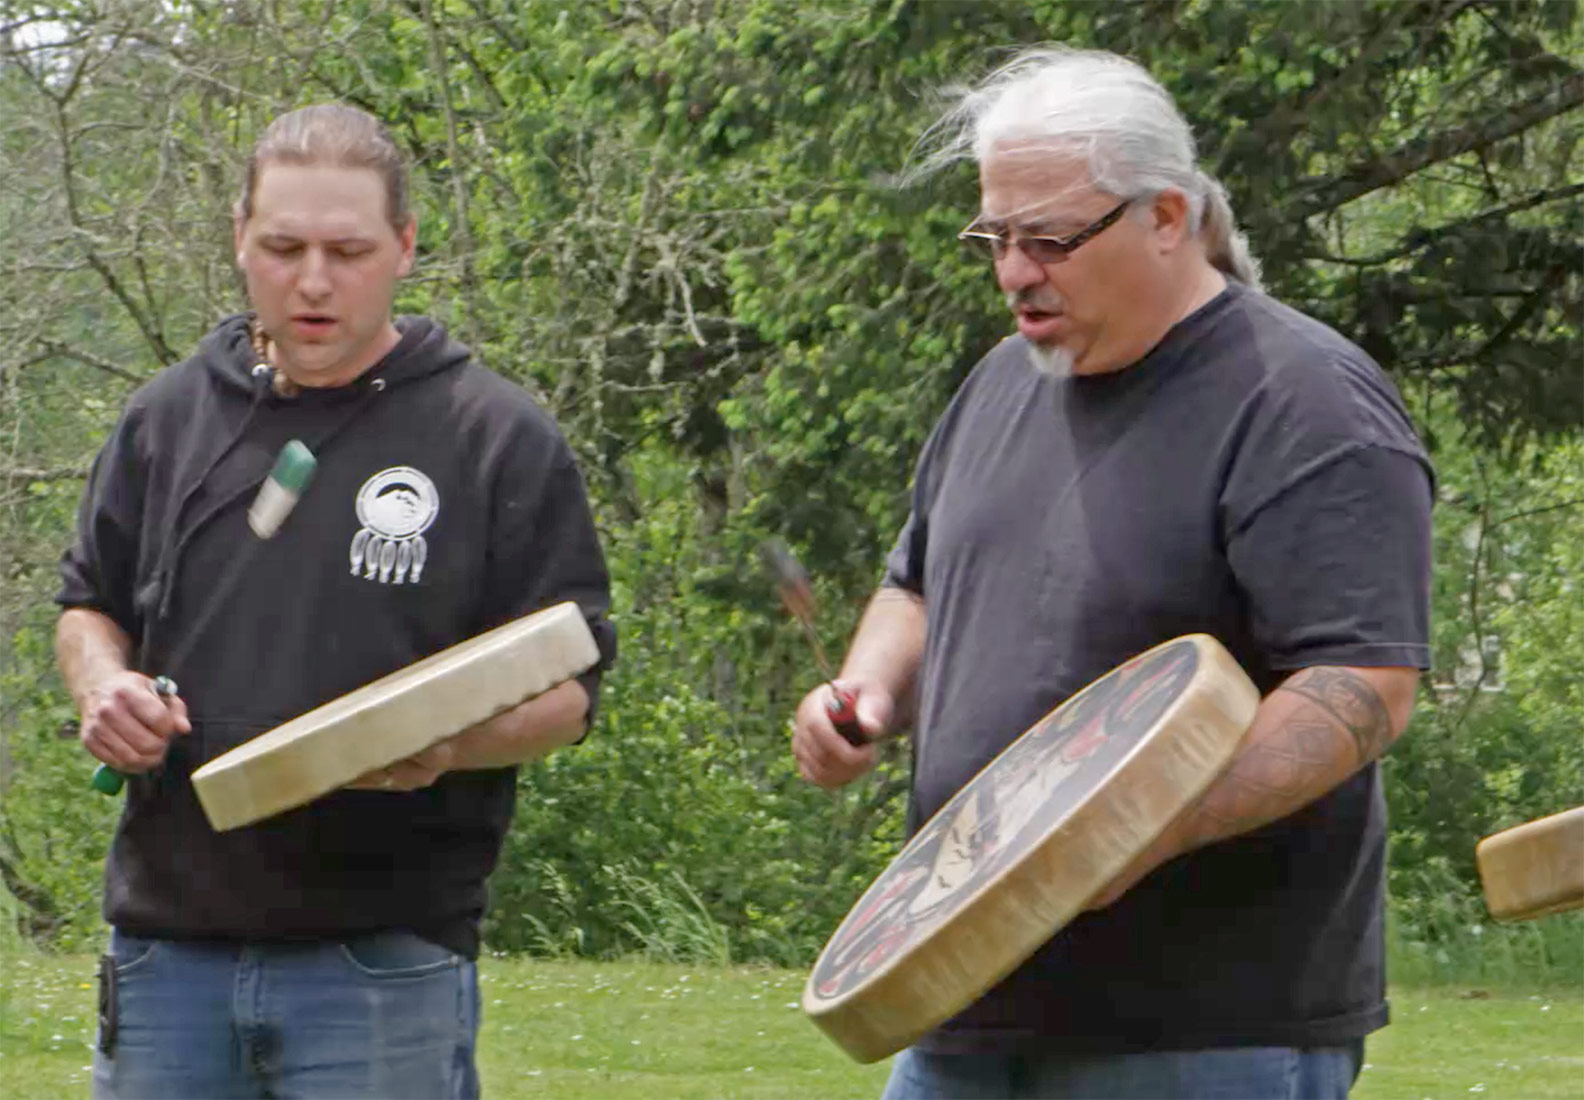 Two members of the Confederated Tribes of Grand Ronde beating drums in an outdoor ceremony.